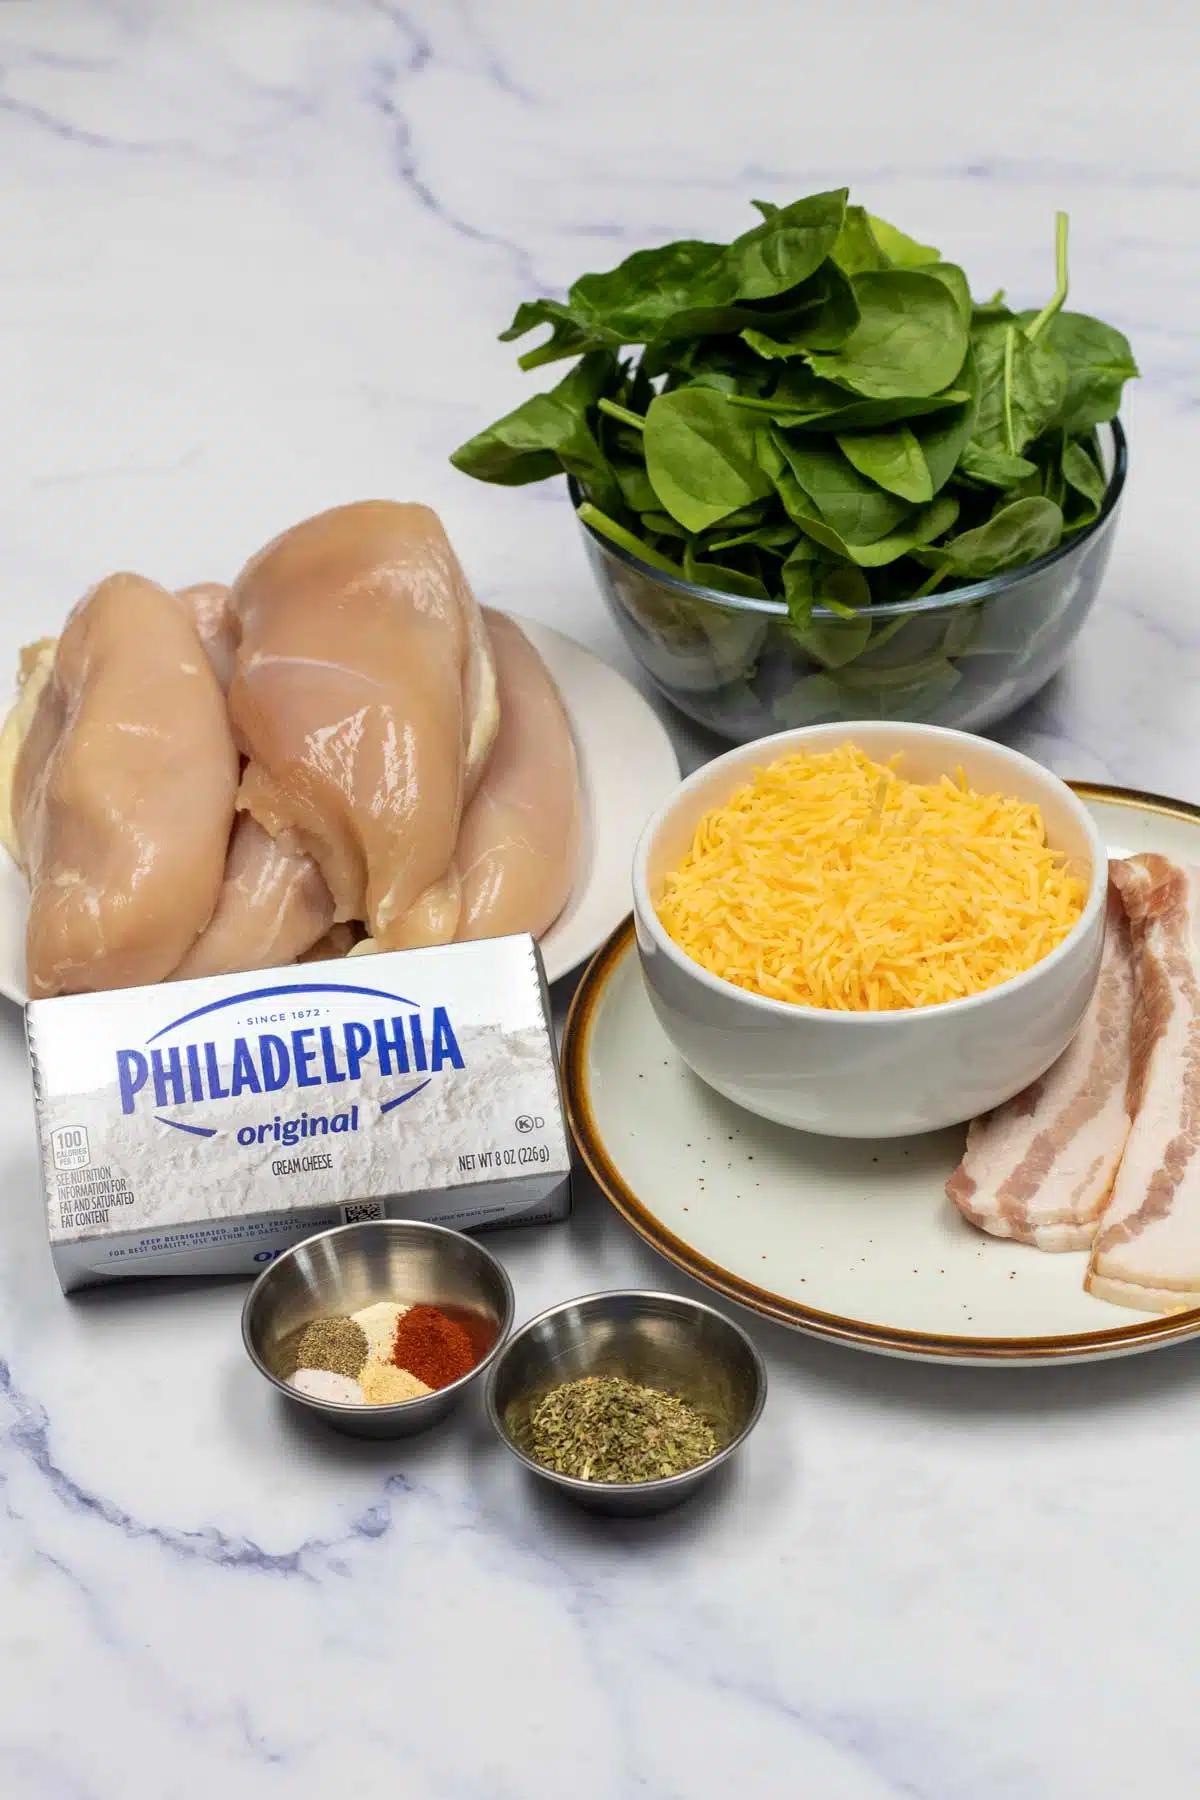 Tall image of spinach stuffed chicken breast ingredients.